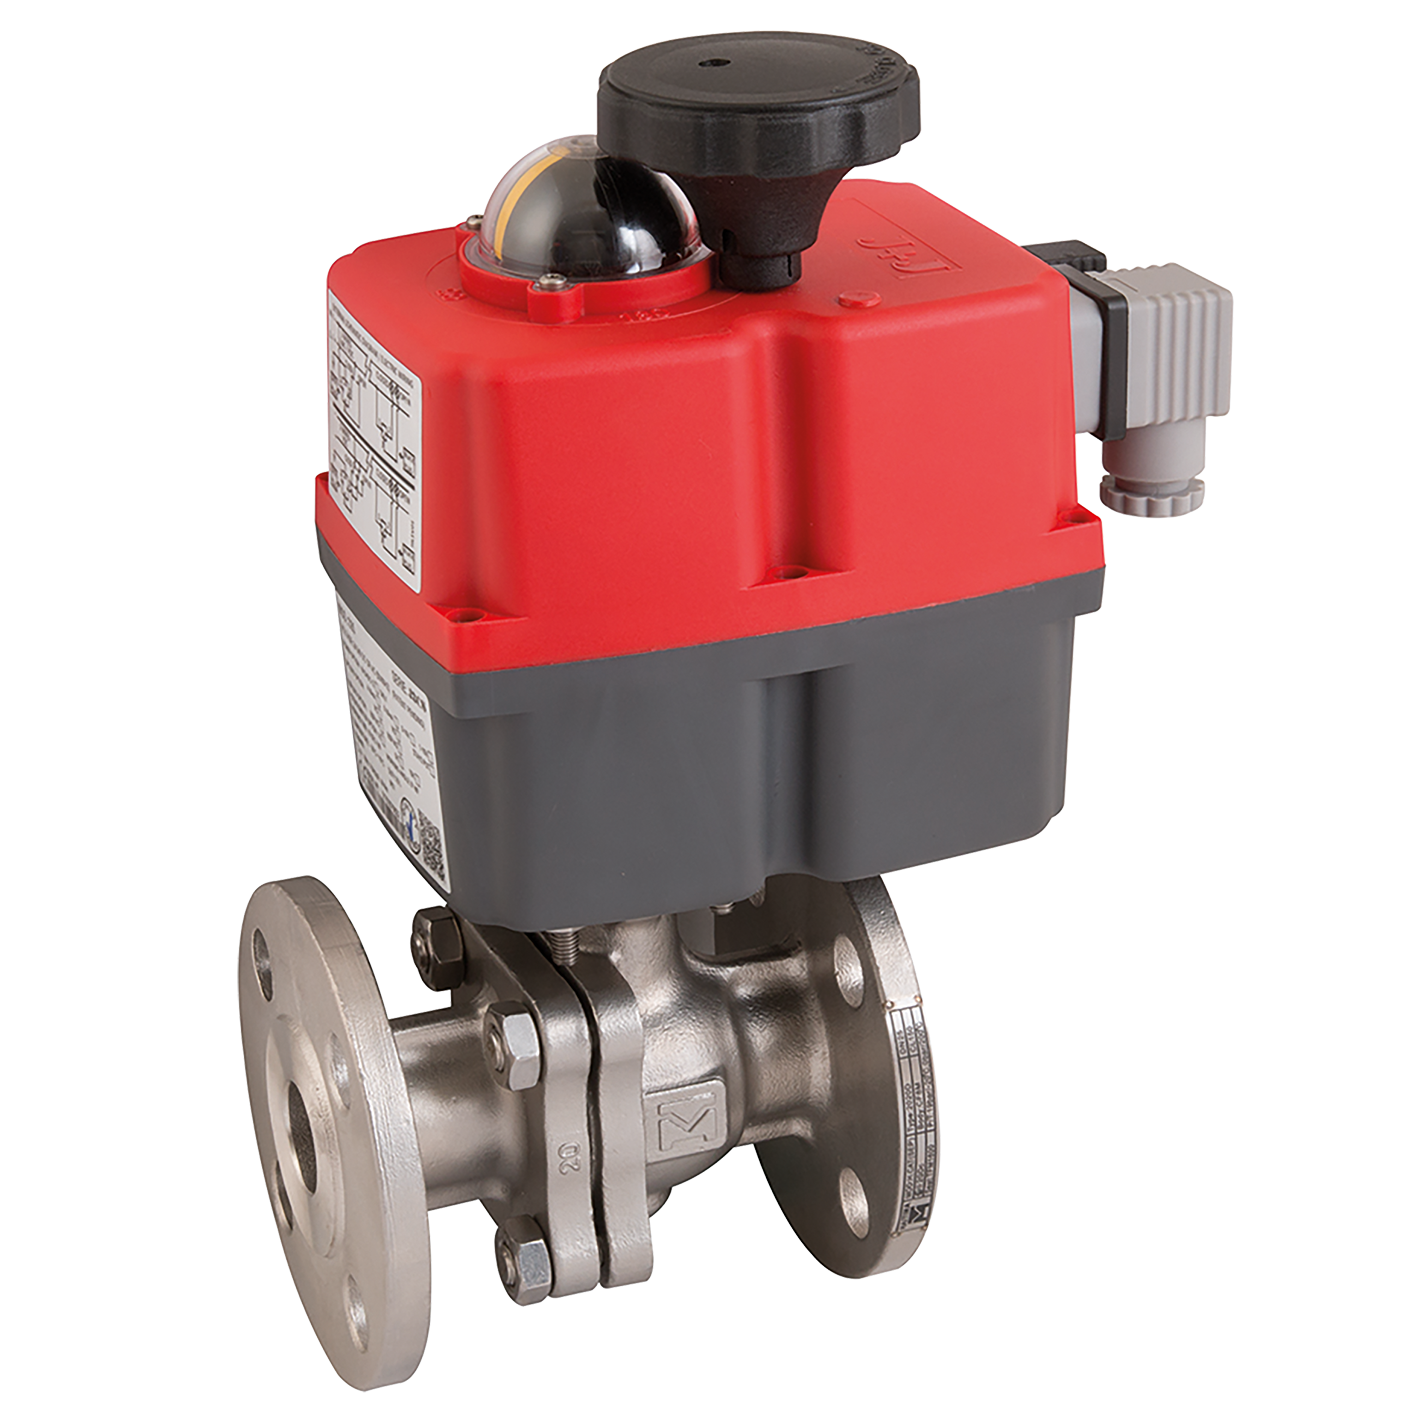 UK's Leading Suppliers of Electric Actuated Stainless Steel Valve